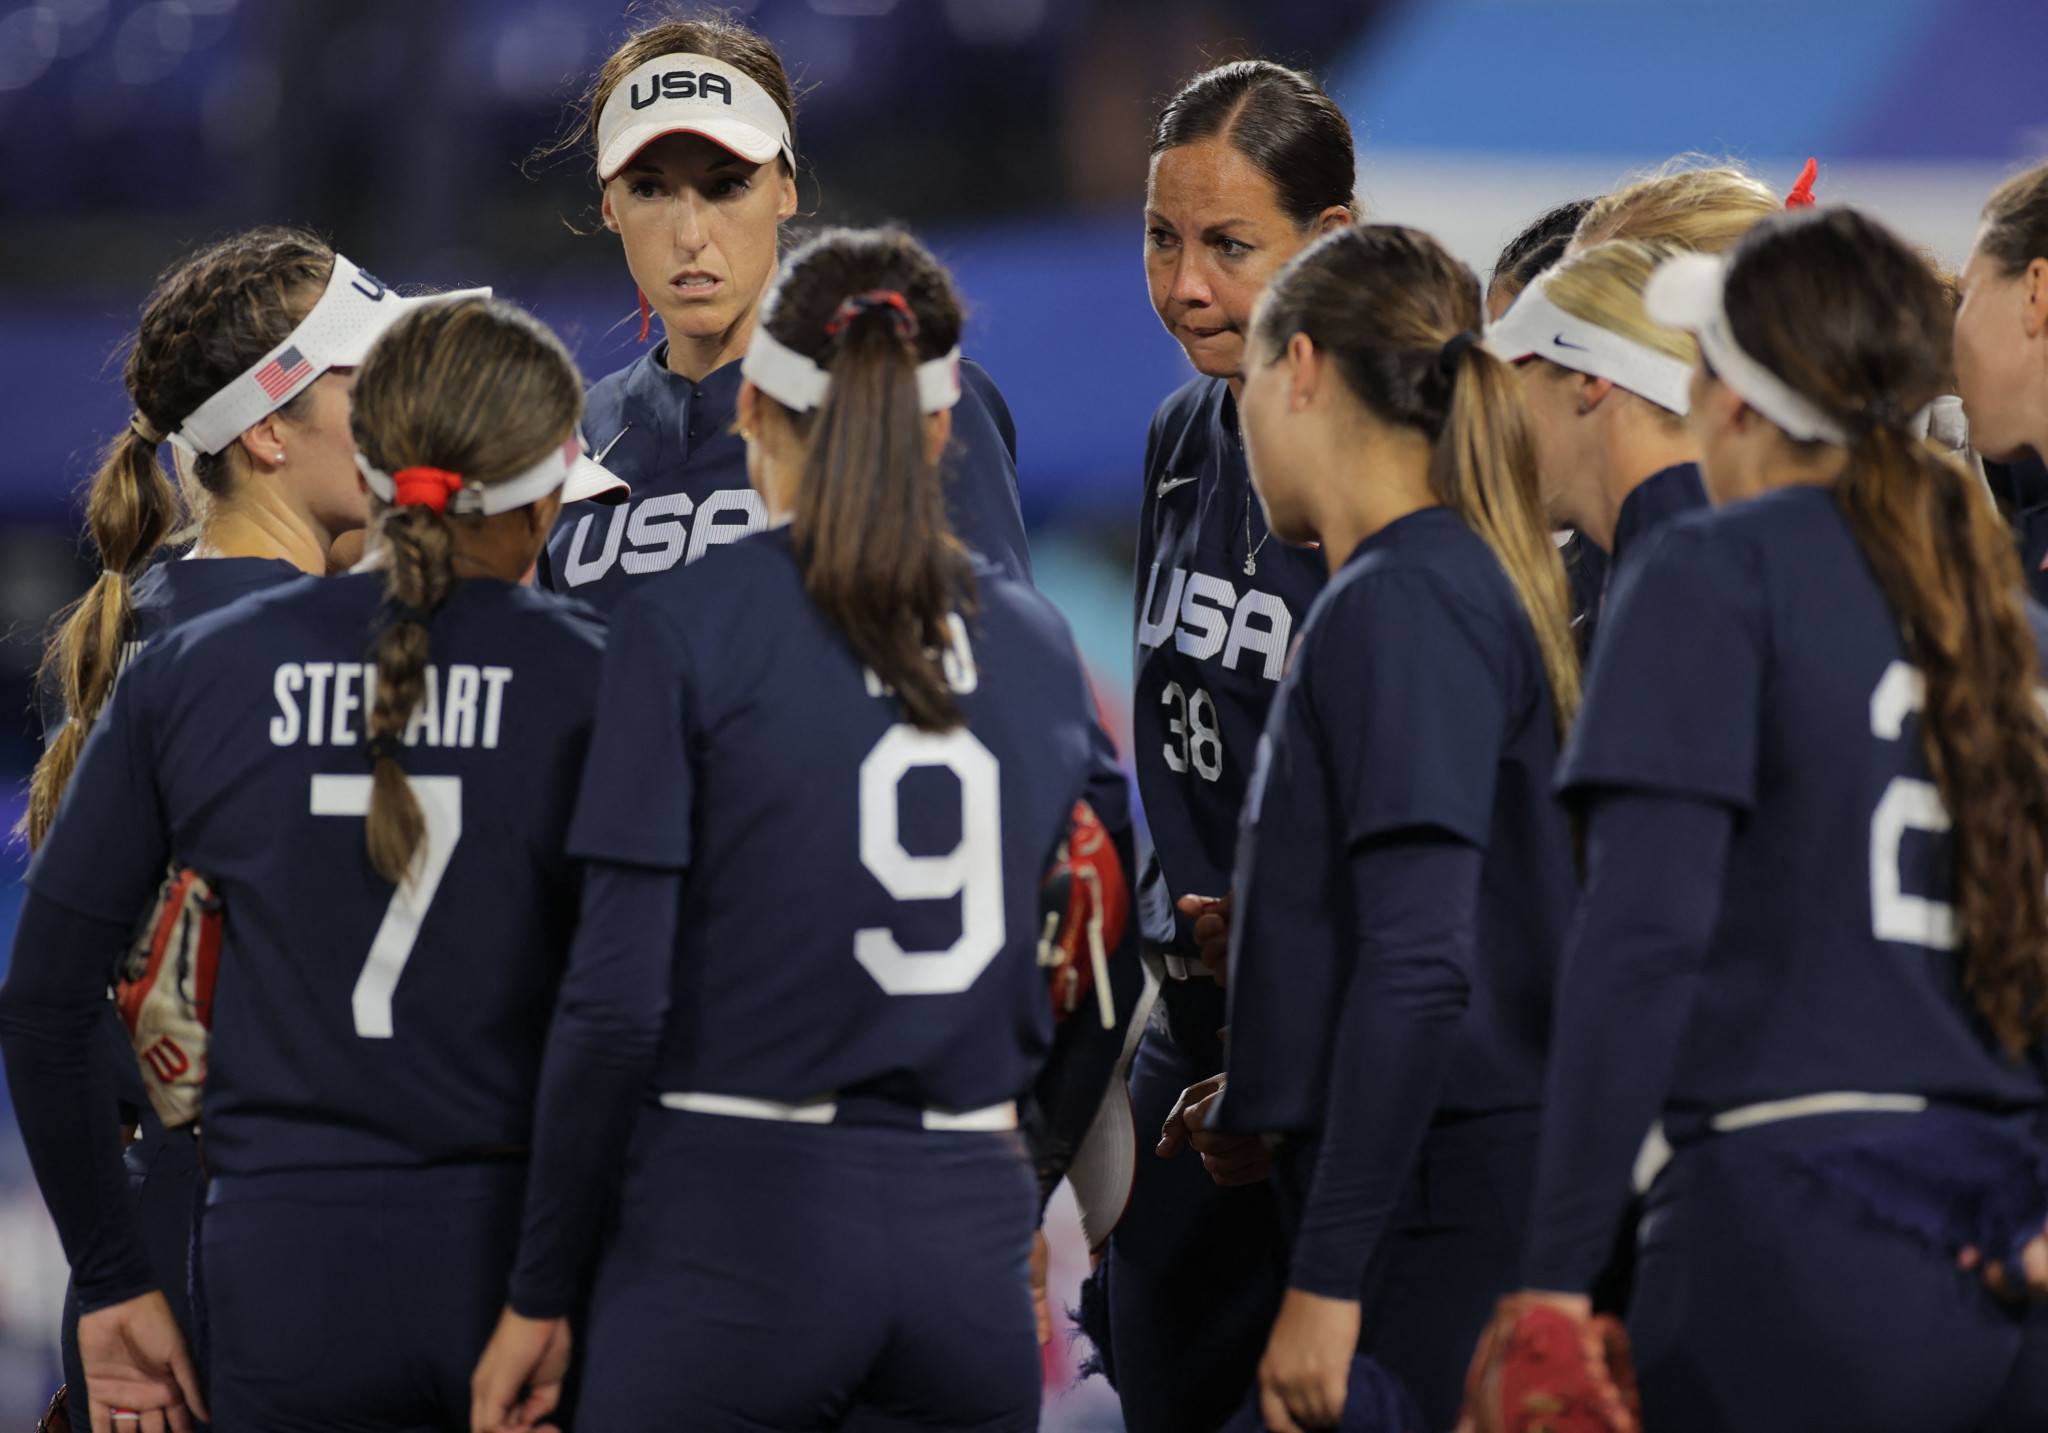 USA Softball has announced its three assistant coaches for the World Games 2022 ©Getty Images